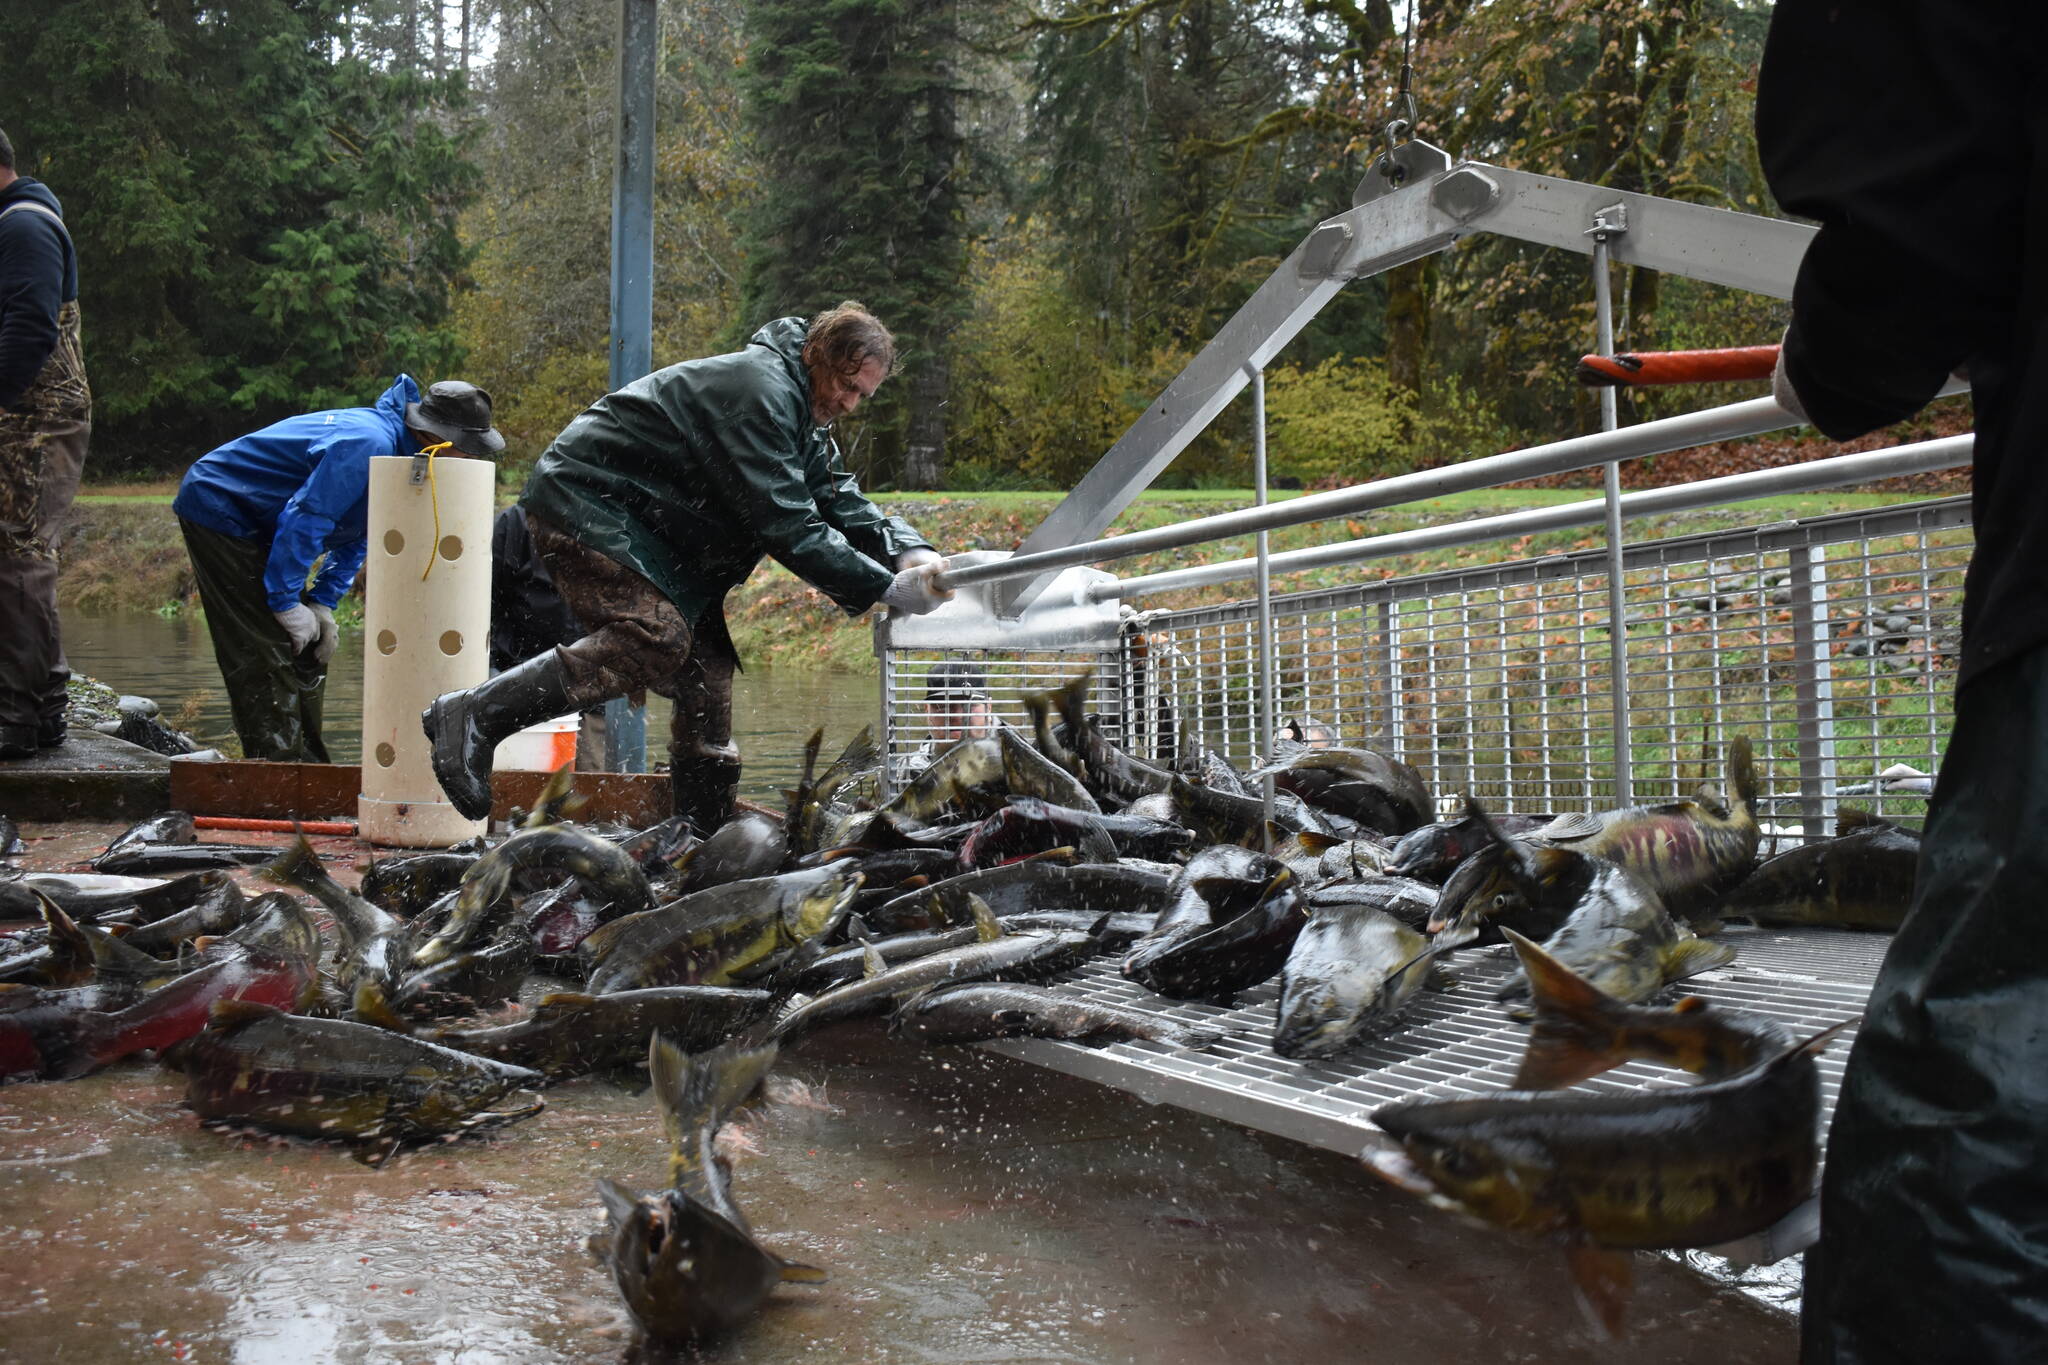 Clayton Franke / The Daily World
Volunteers unload hatchery chum and coho salmon onto a concrete pad at the Satsop Springs Hatchery on Saturday, Nov. 4.